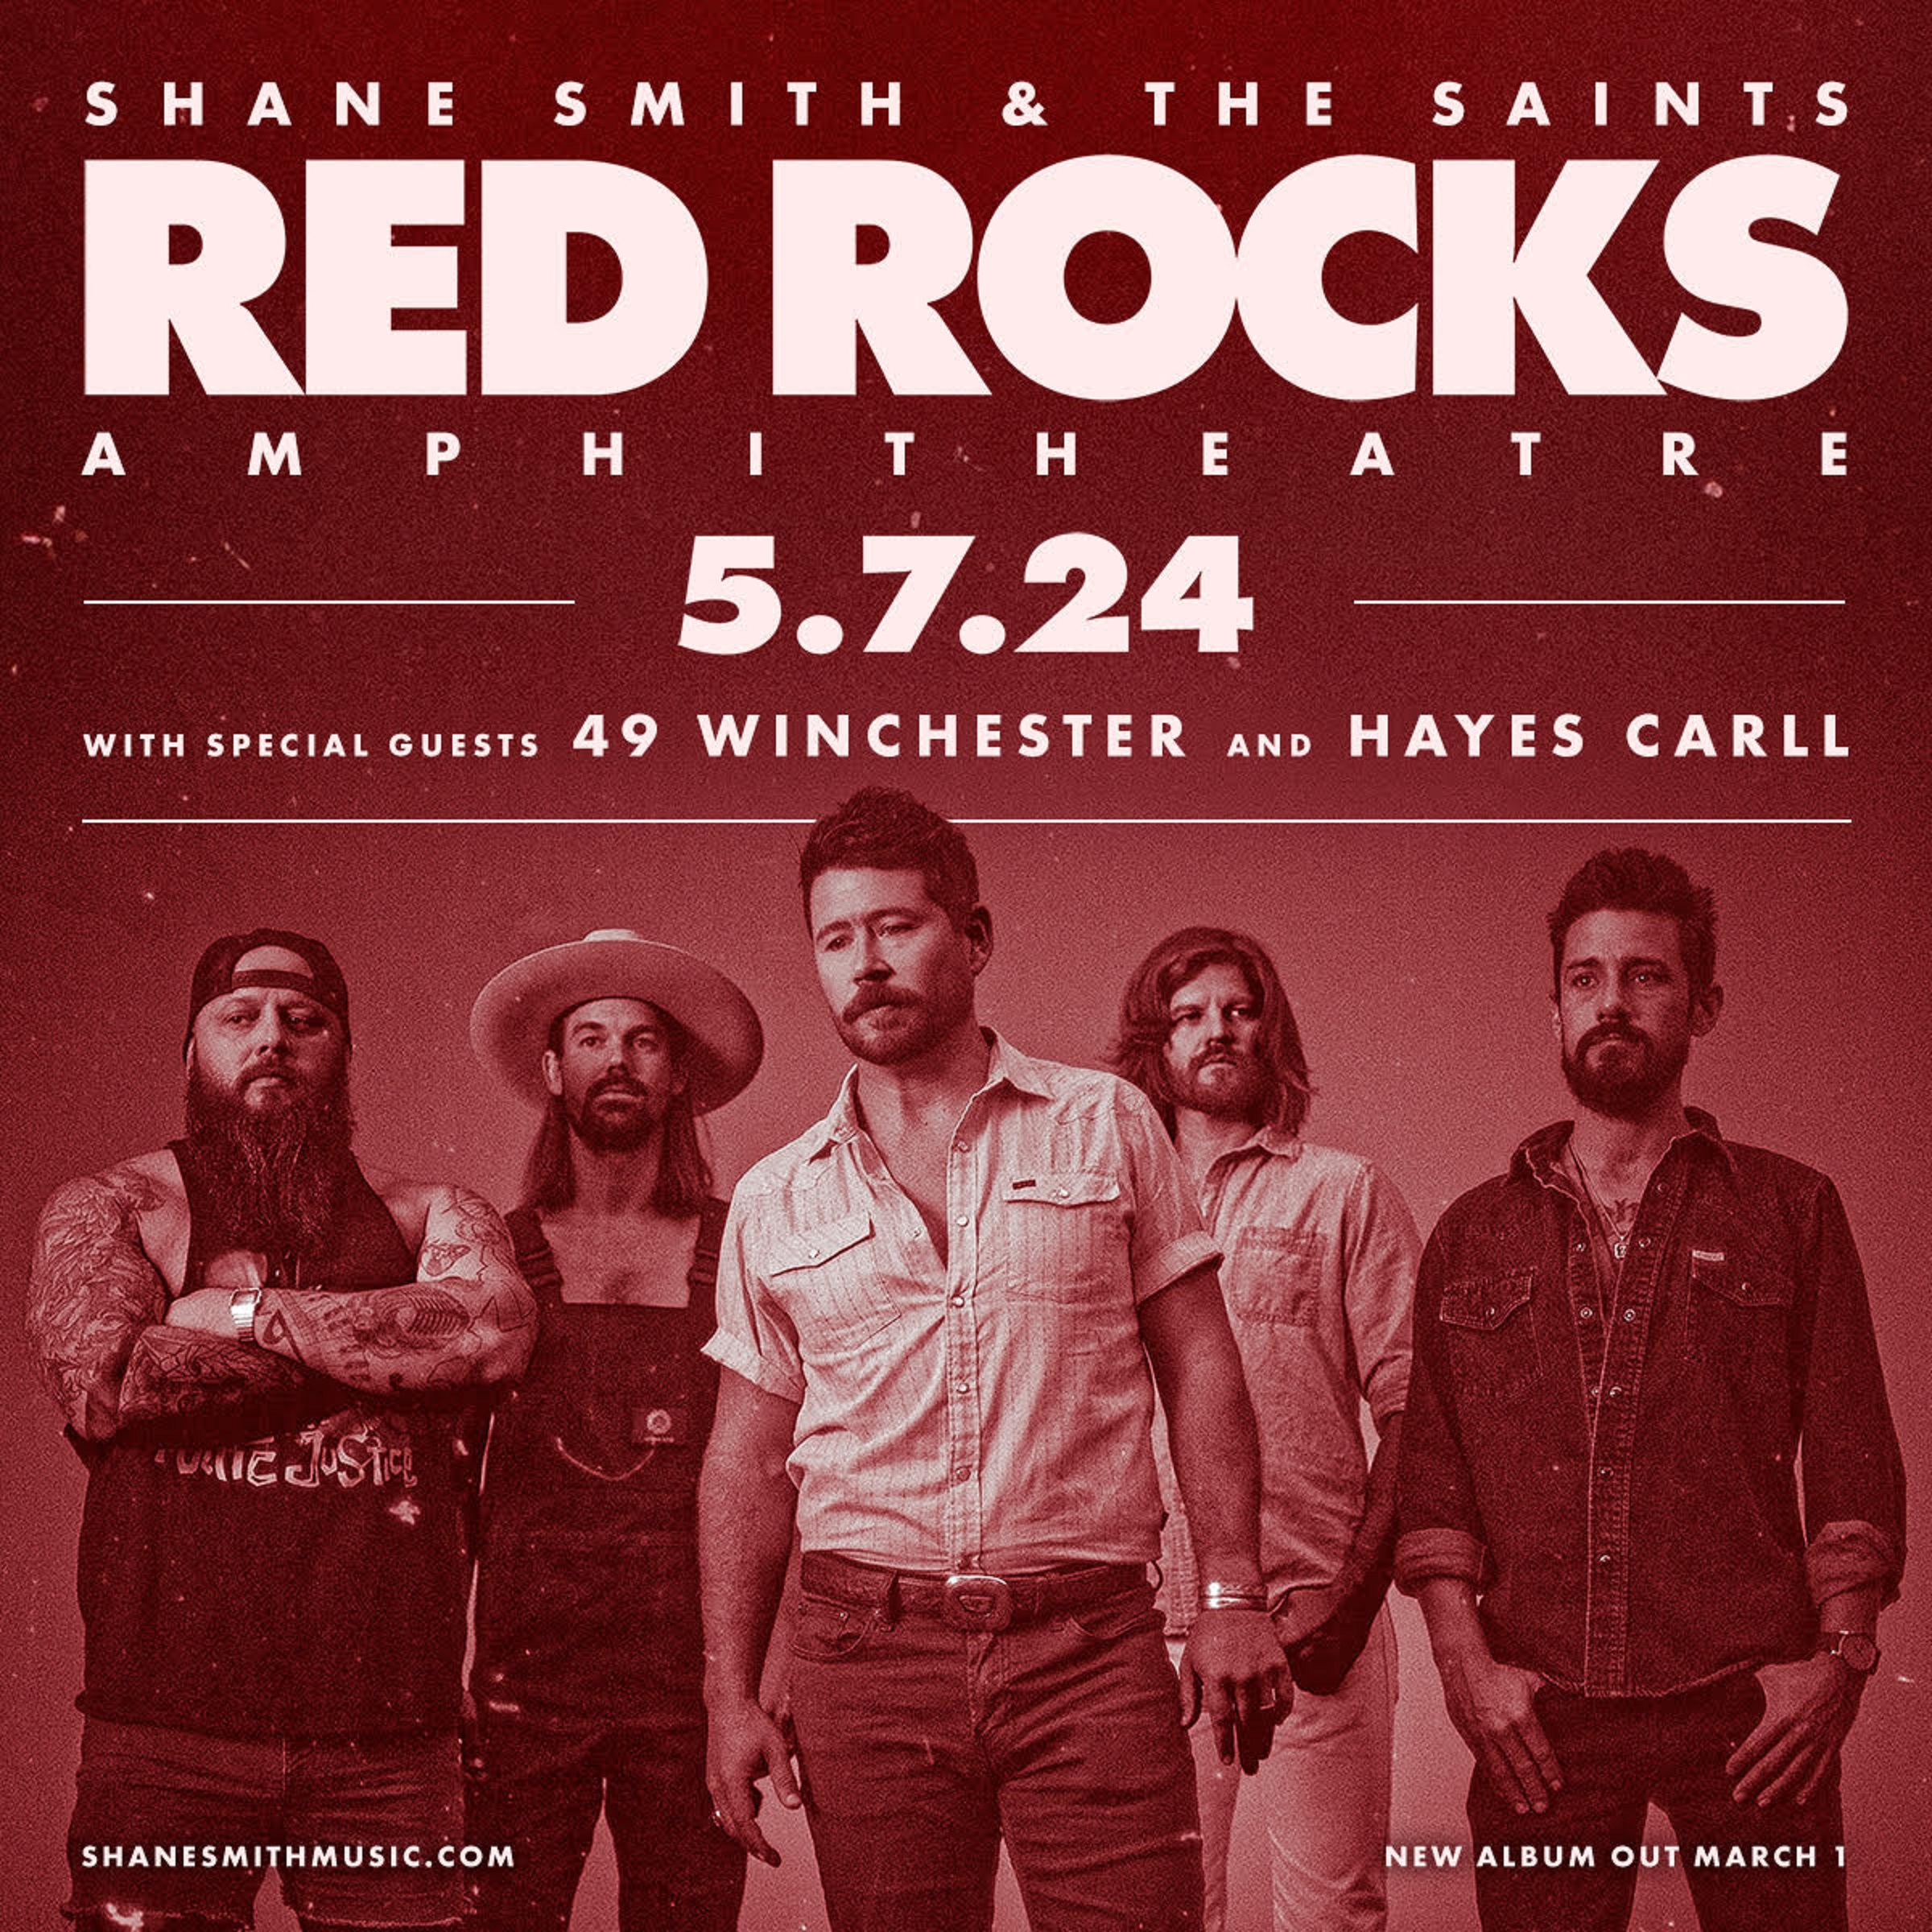 The Saints Come Marching In: A Musical Pilgrimage to Red Rocks with Shane Smith